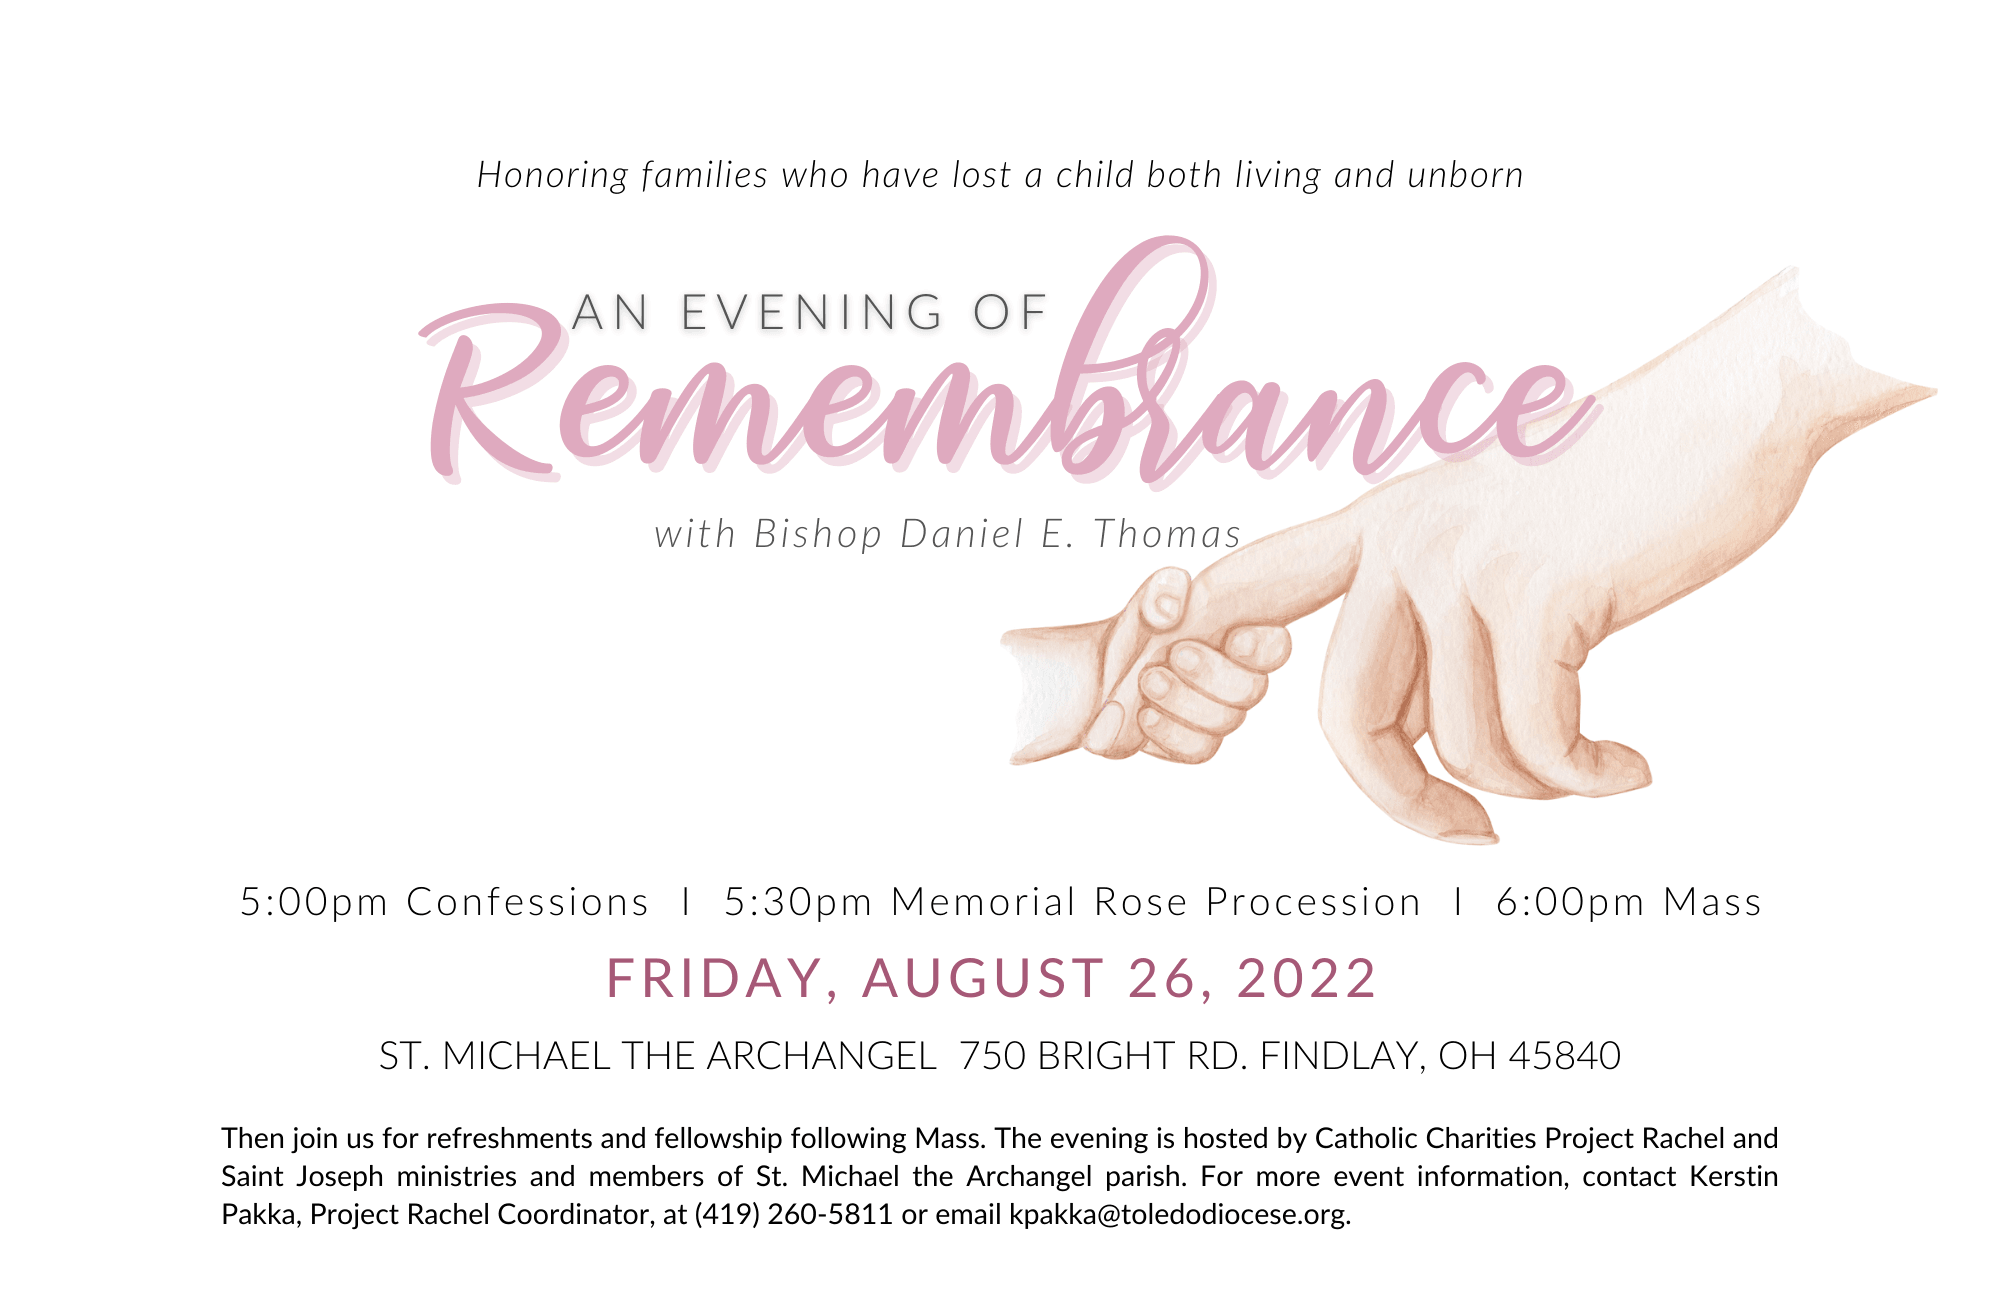 This Evening of Remembrance with Bishop Daniel E. Thomas honors families who have lost a child, both living and unborn. 